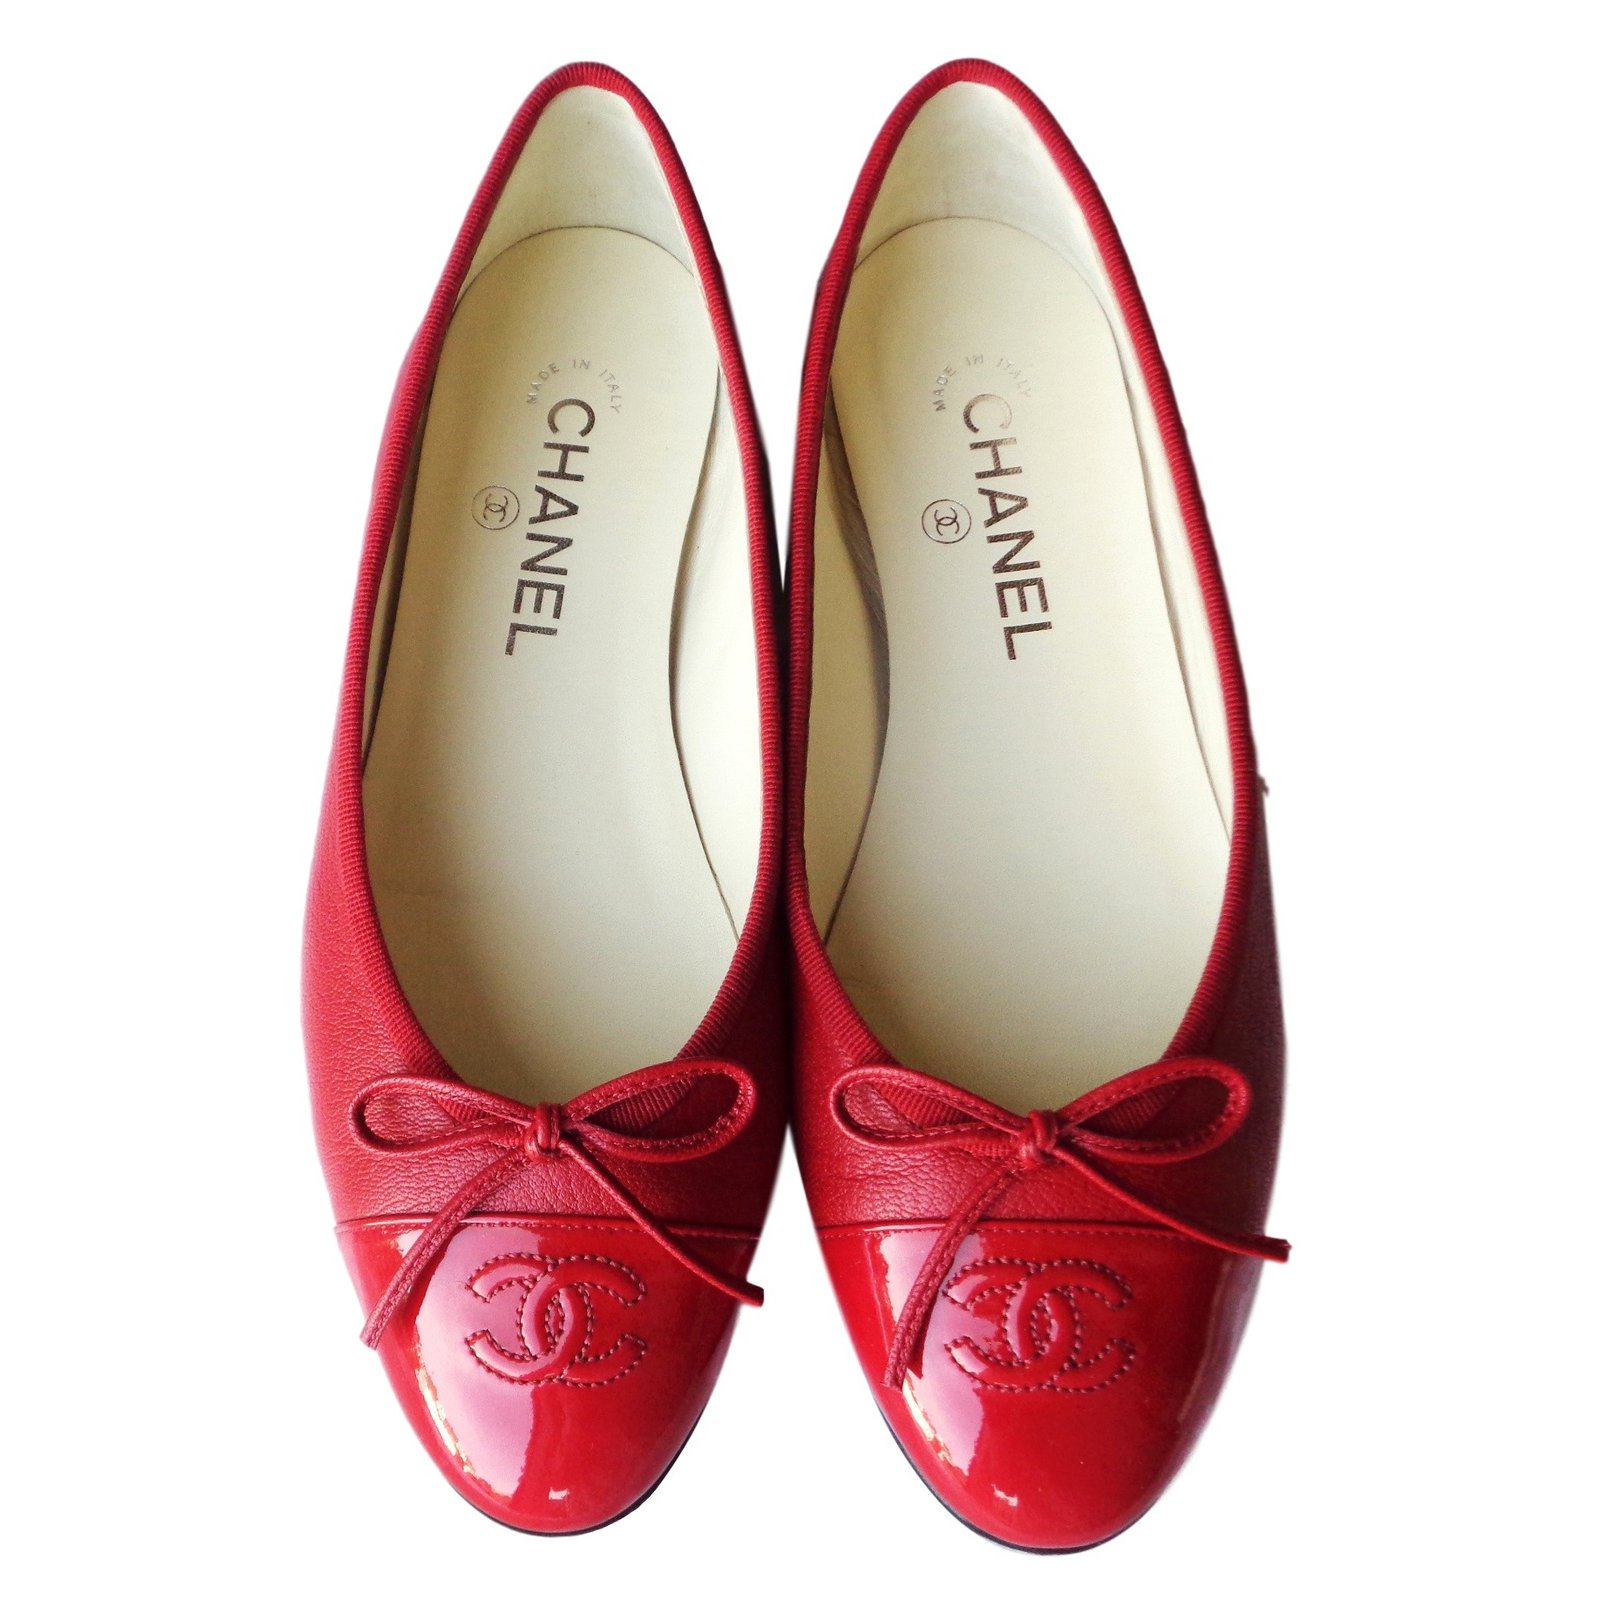 Chanel Red Leather CC Cap Toe Ballet Flats - Chanel